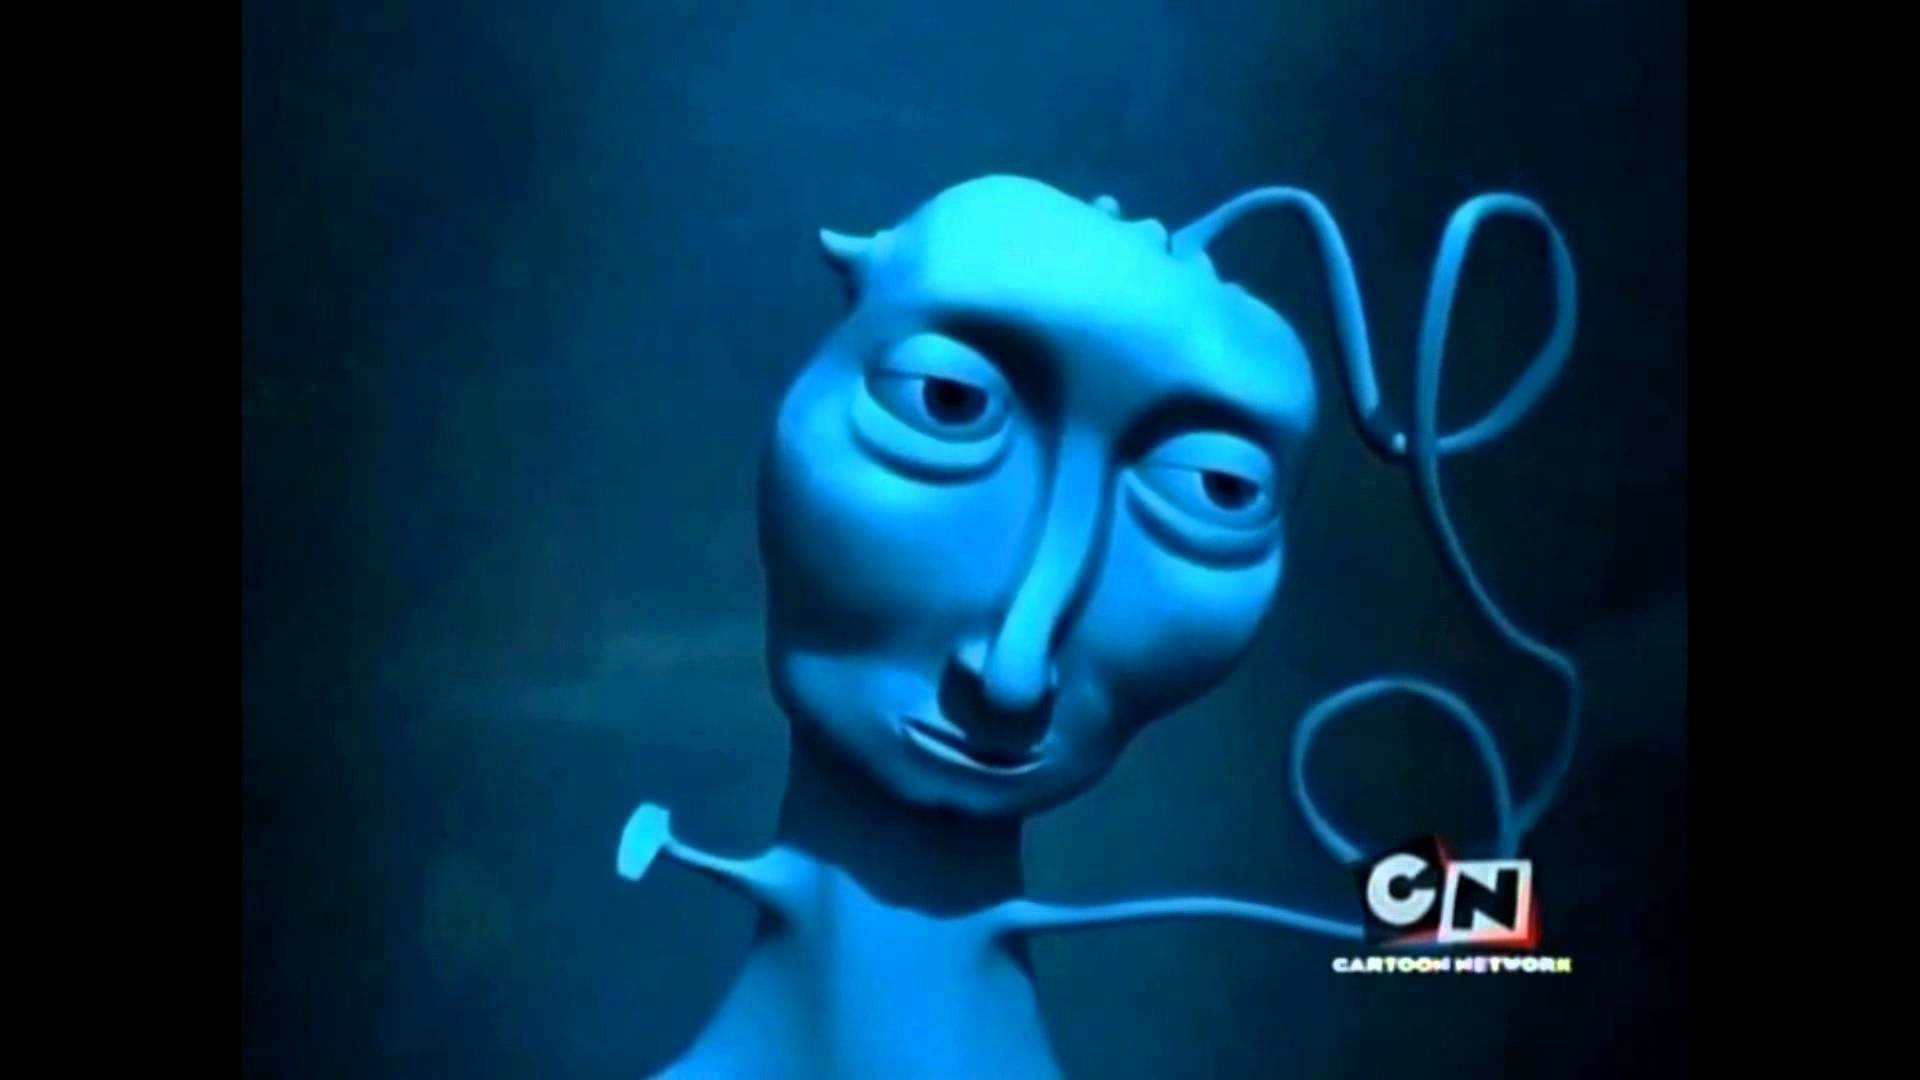 Perfect Cell reacts to the blue creature from Courage The Cowardly Dog